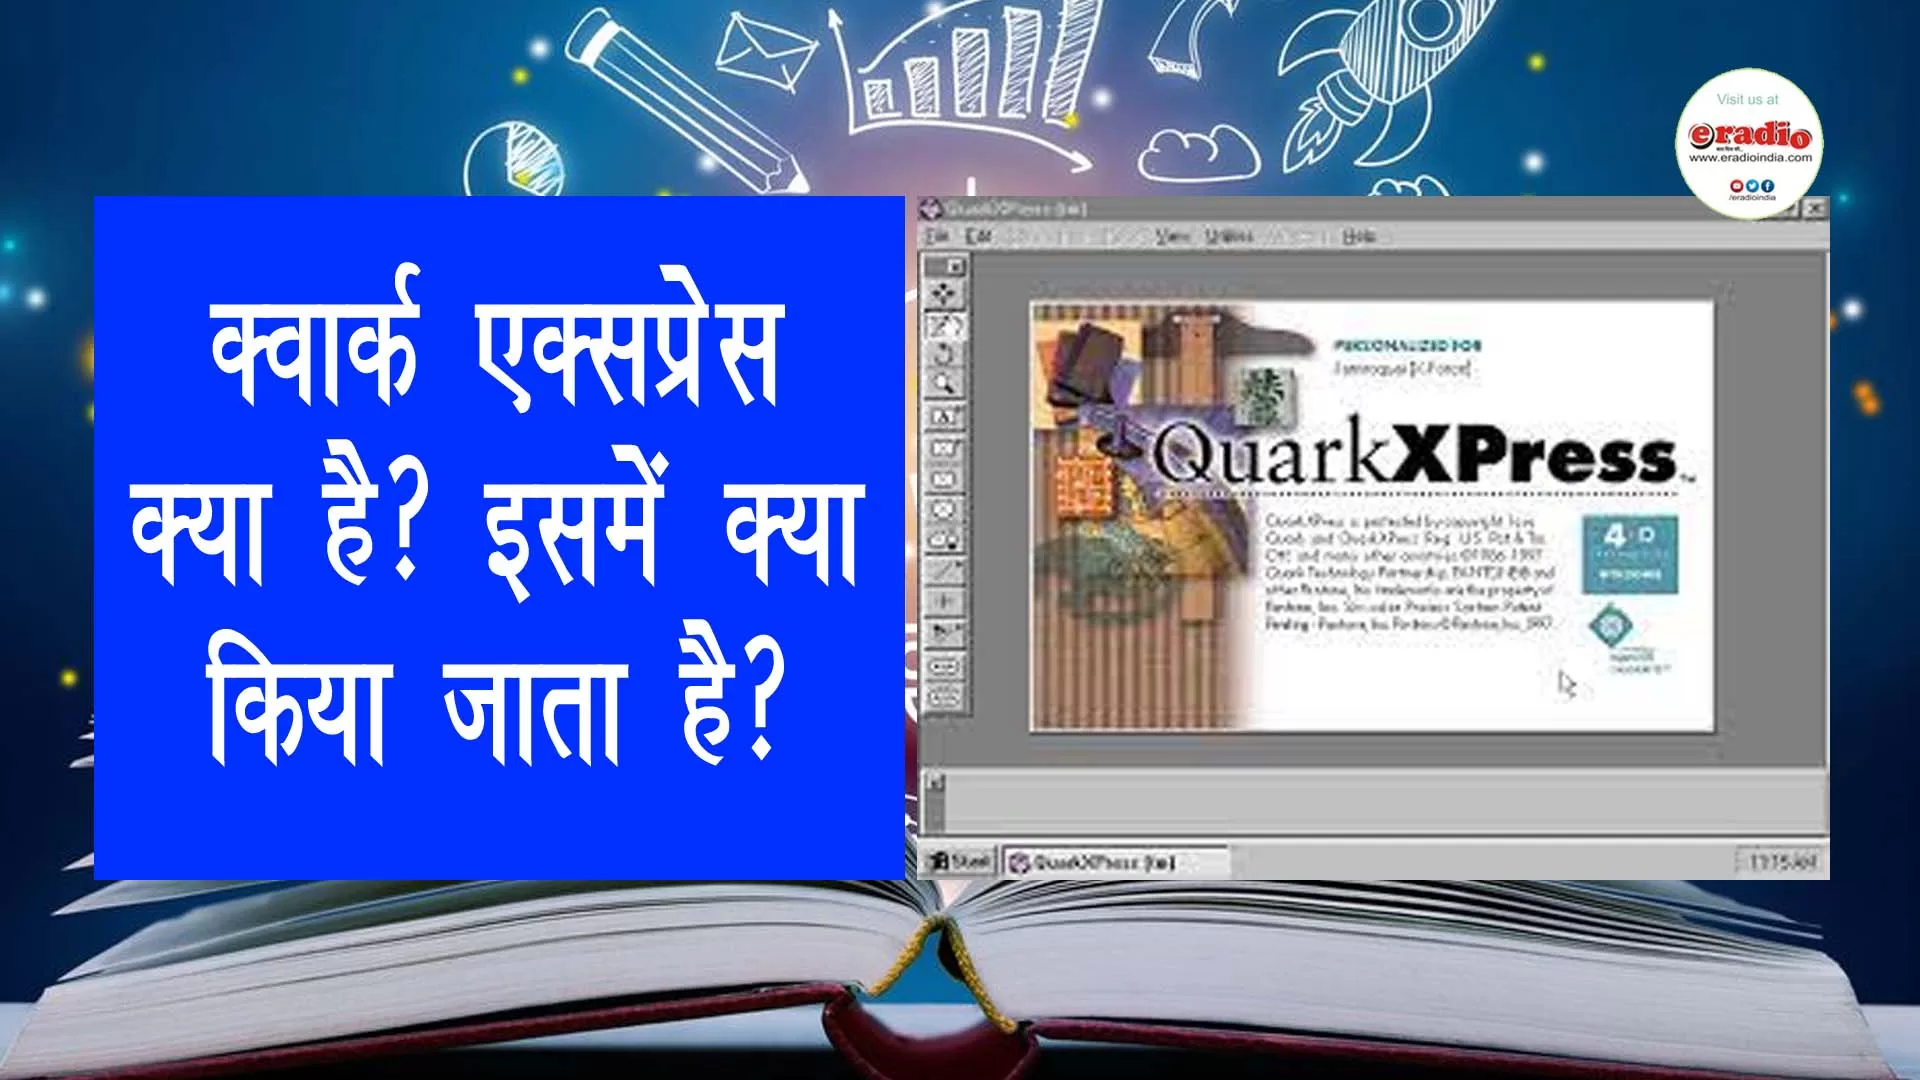 What is Quark Xpress software?